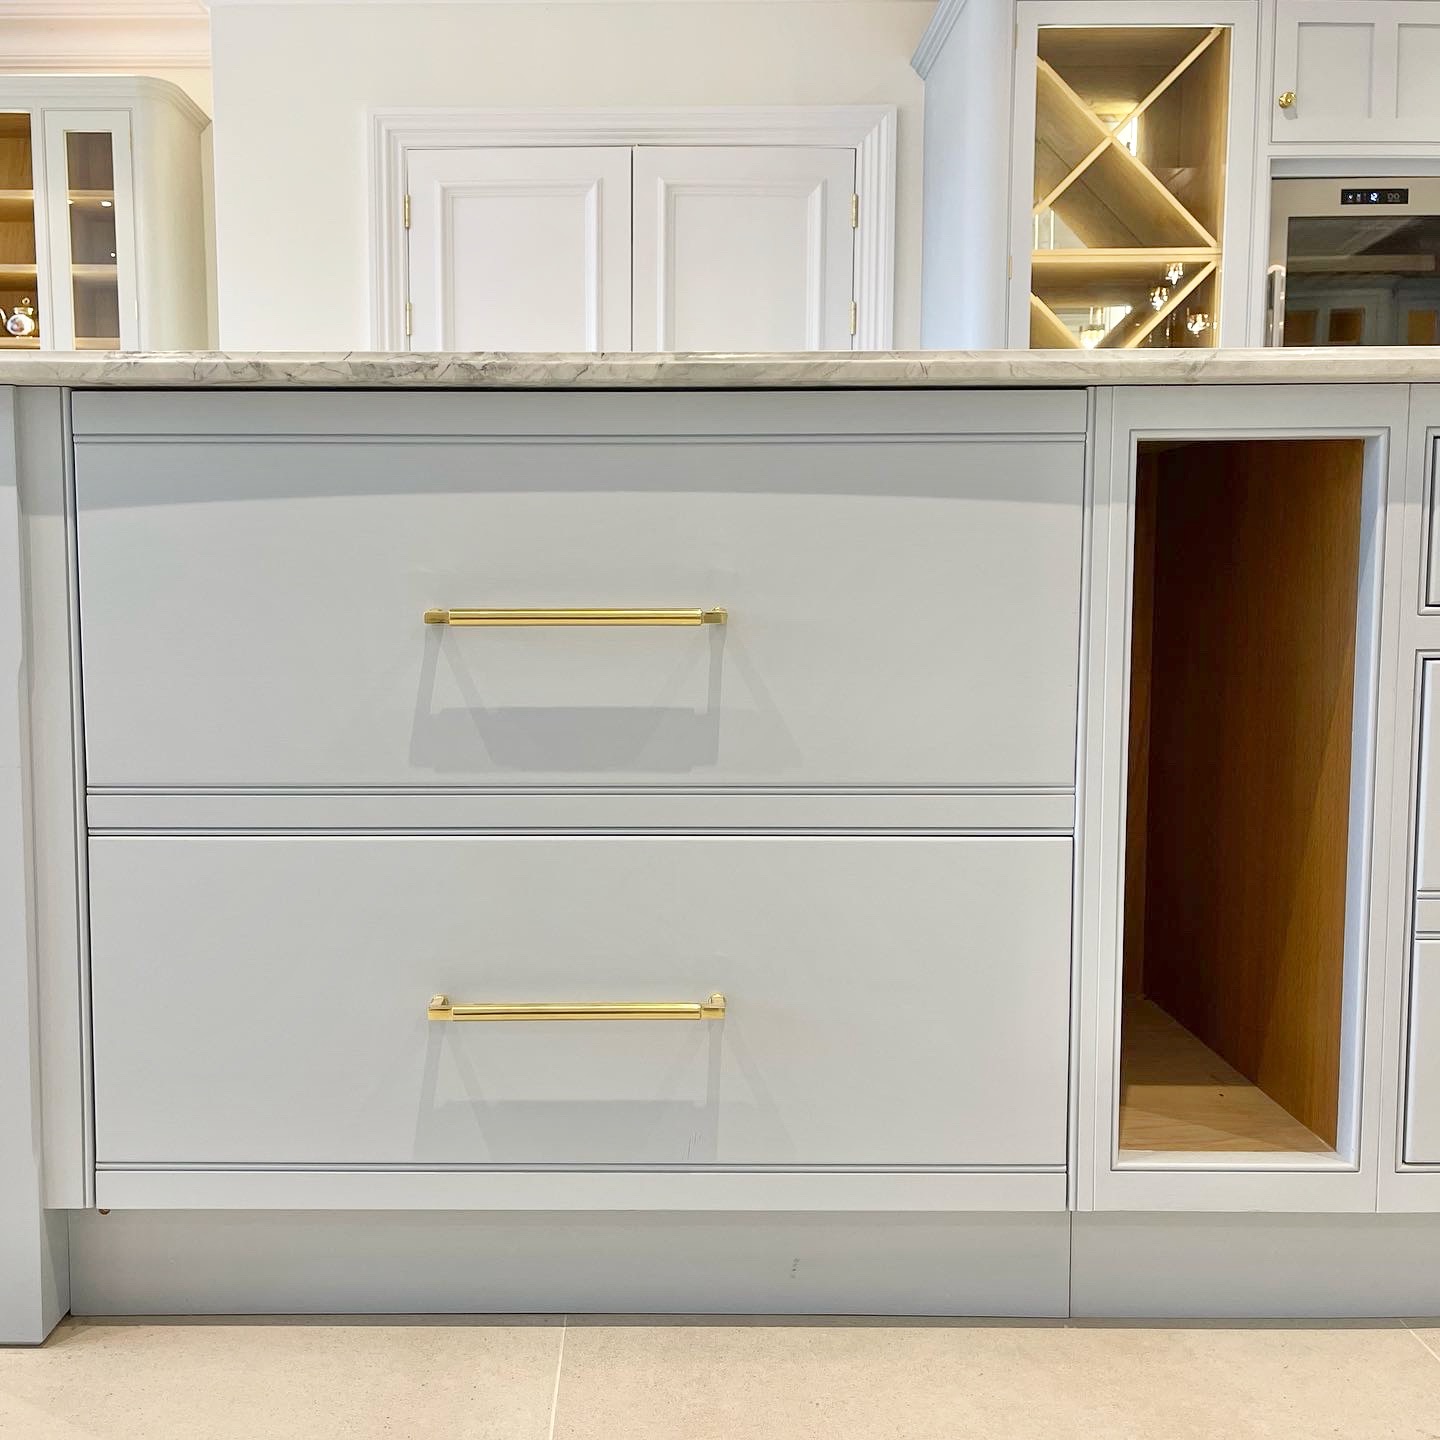 Deep Drawers In the Kitchen Island